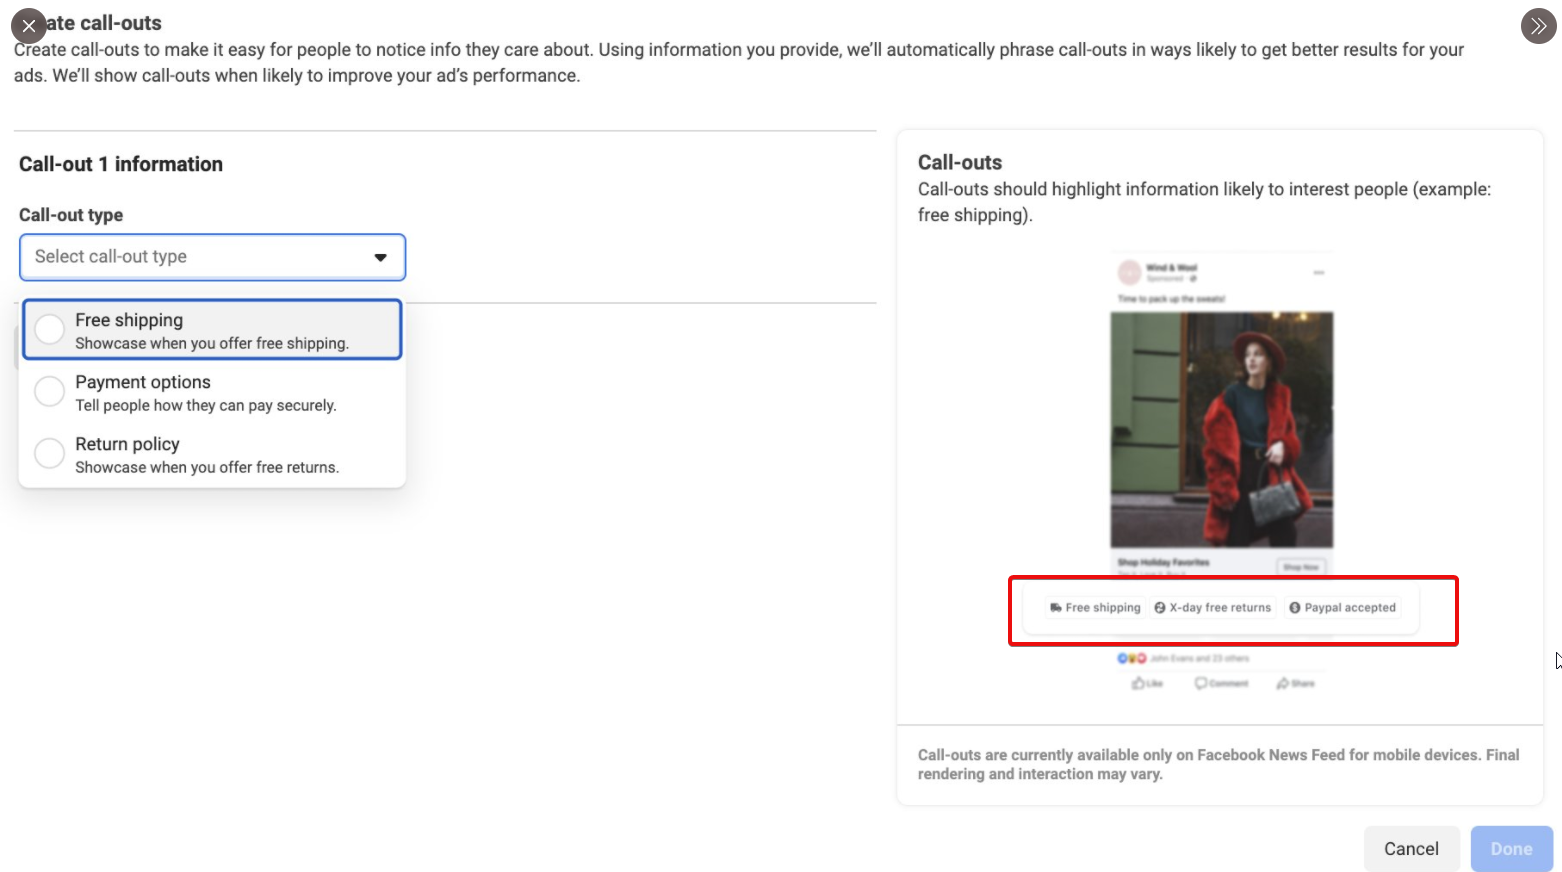 Facebook Ads Now Has A New Optional Call-Outs Option In The Ad Level